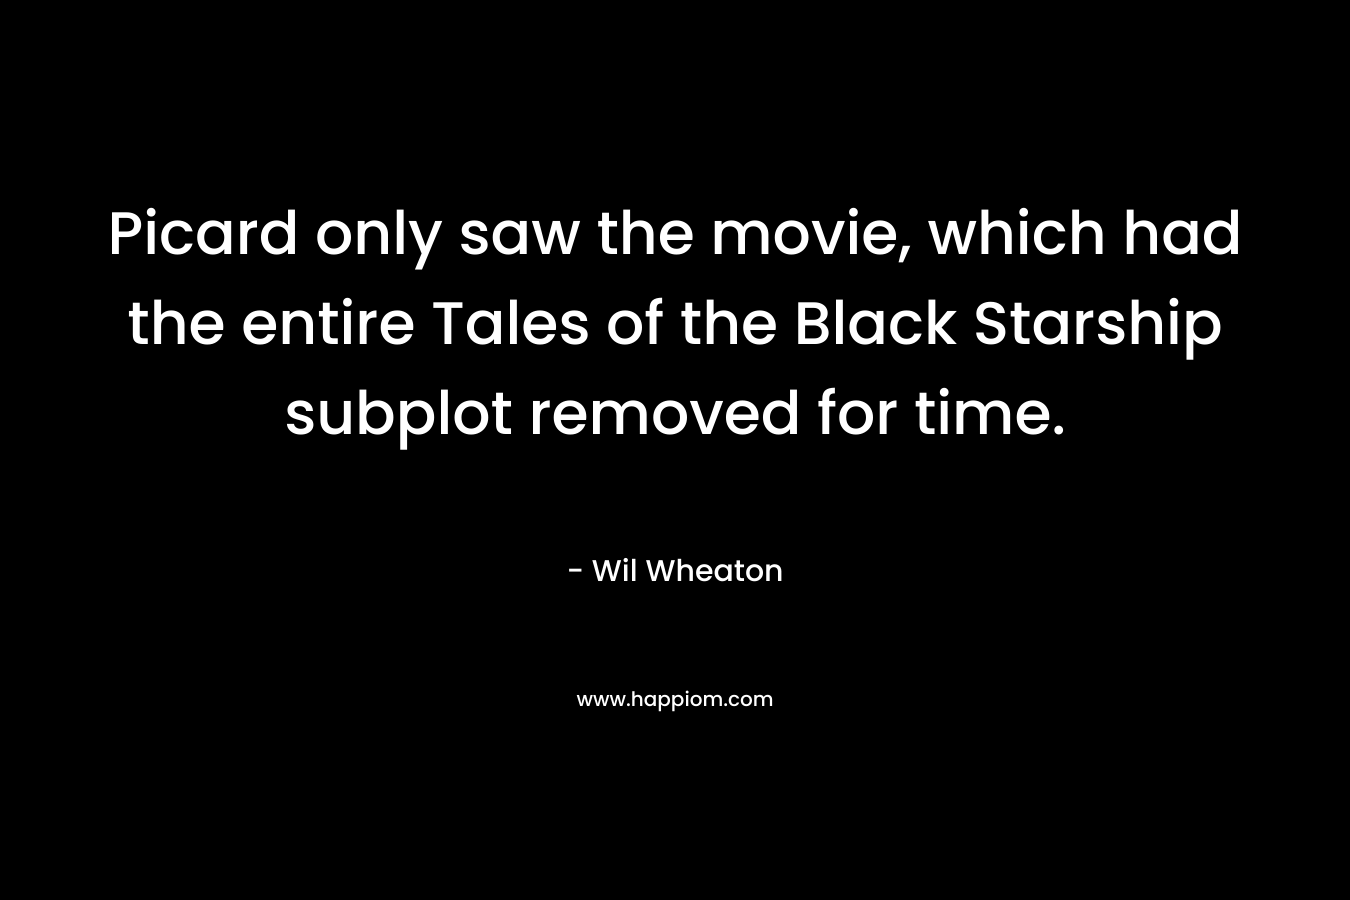 Picard only saw the movie, which had the entire Tales of the Black Starship subplot removed for time. – Wil Wheaton